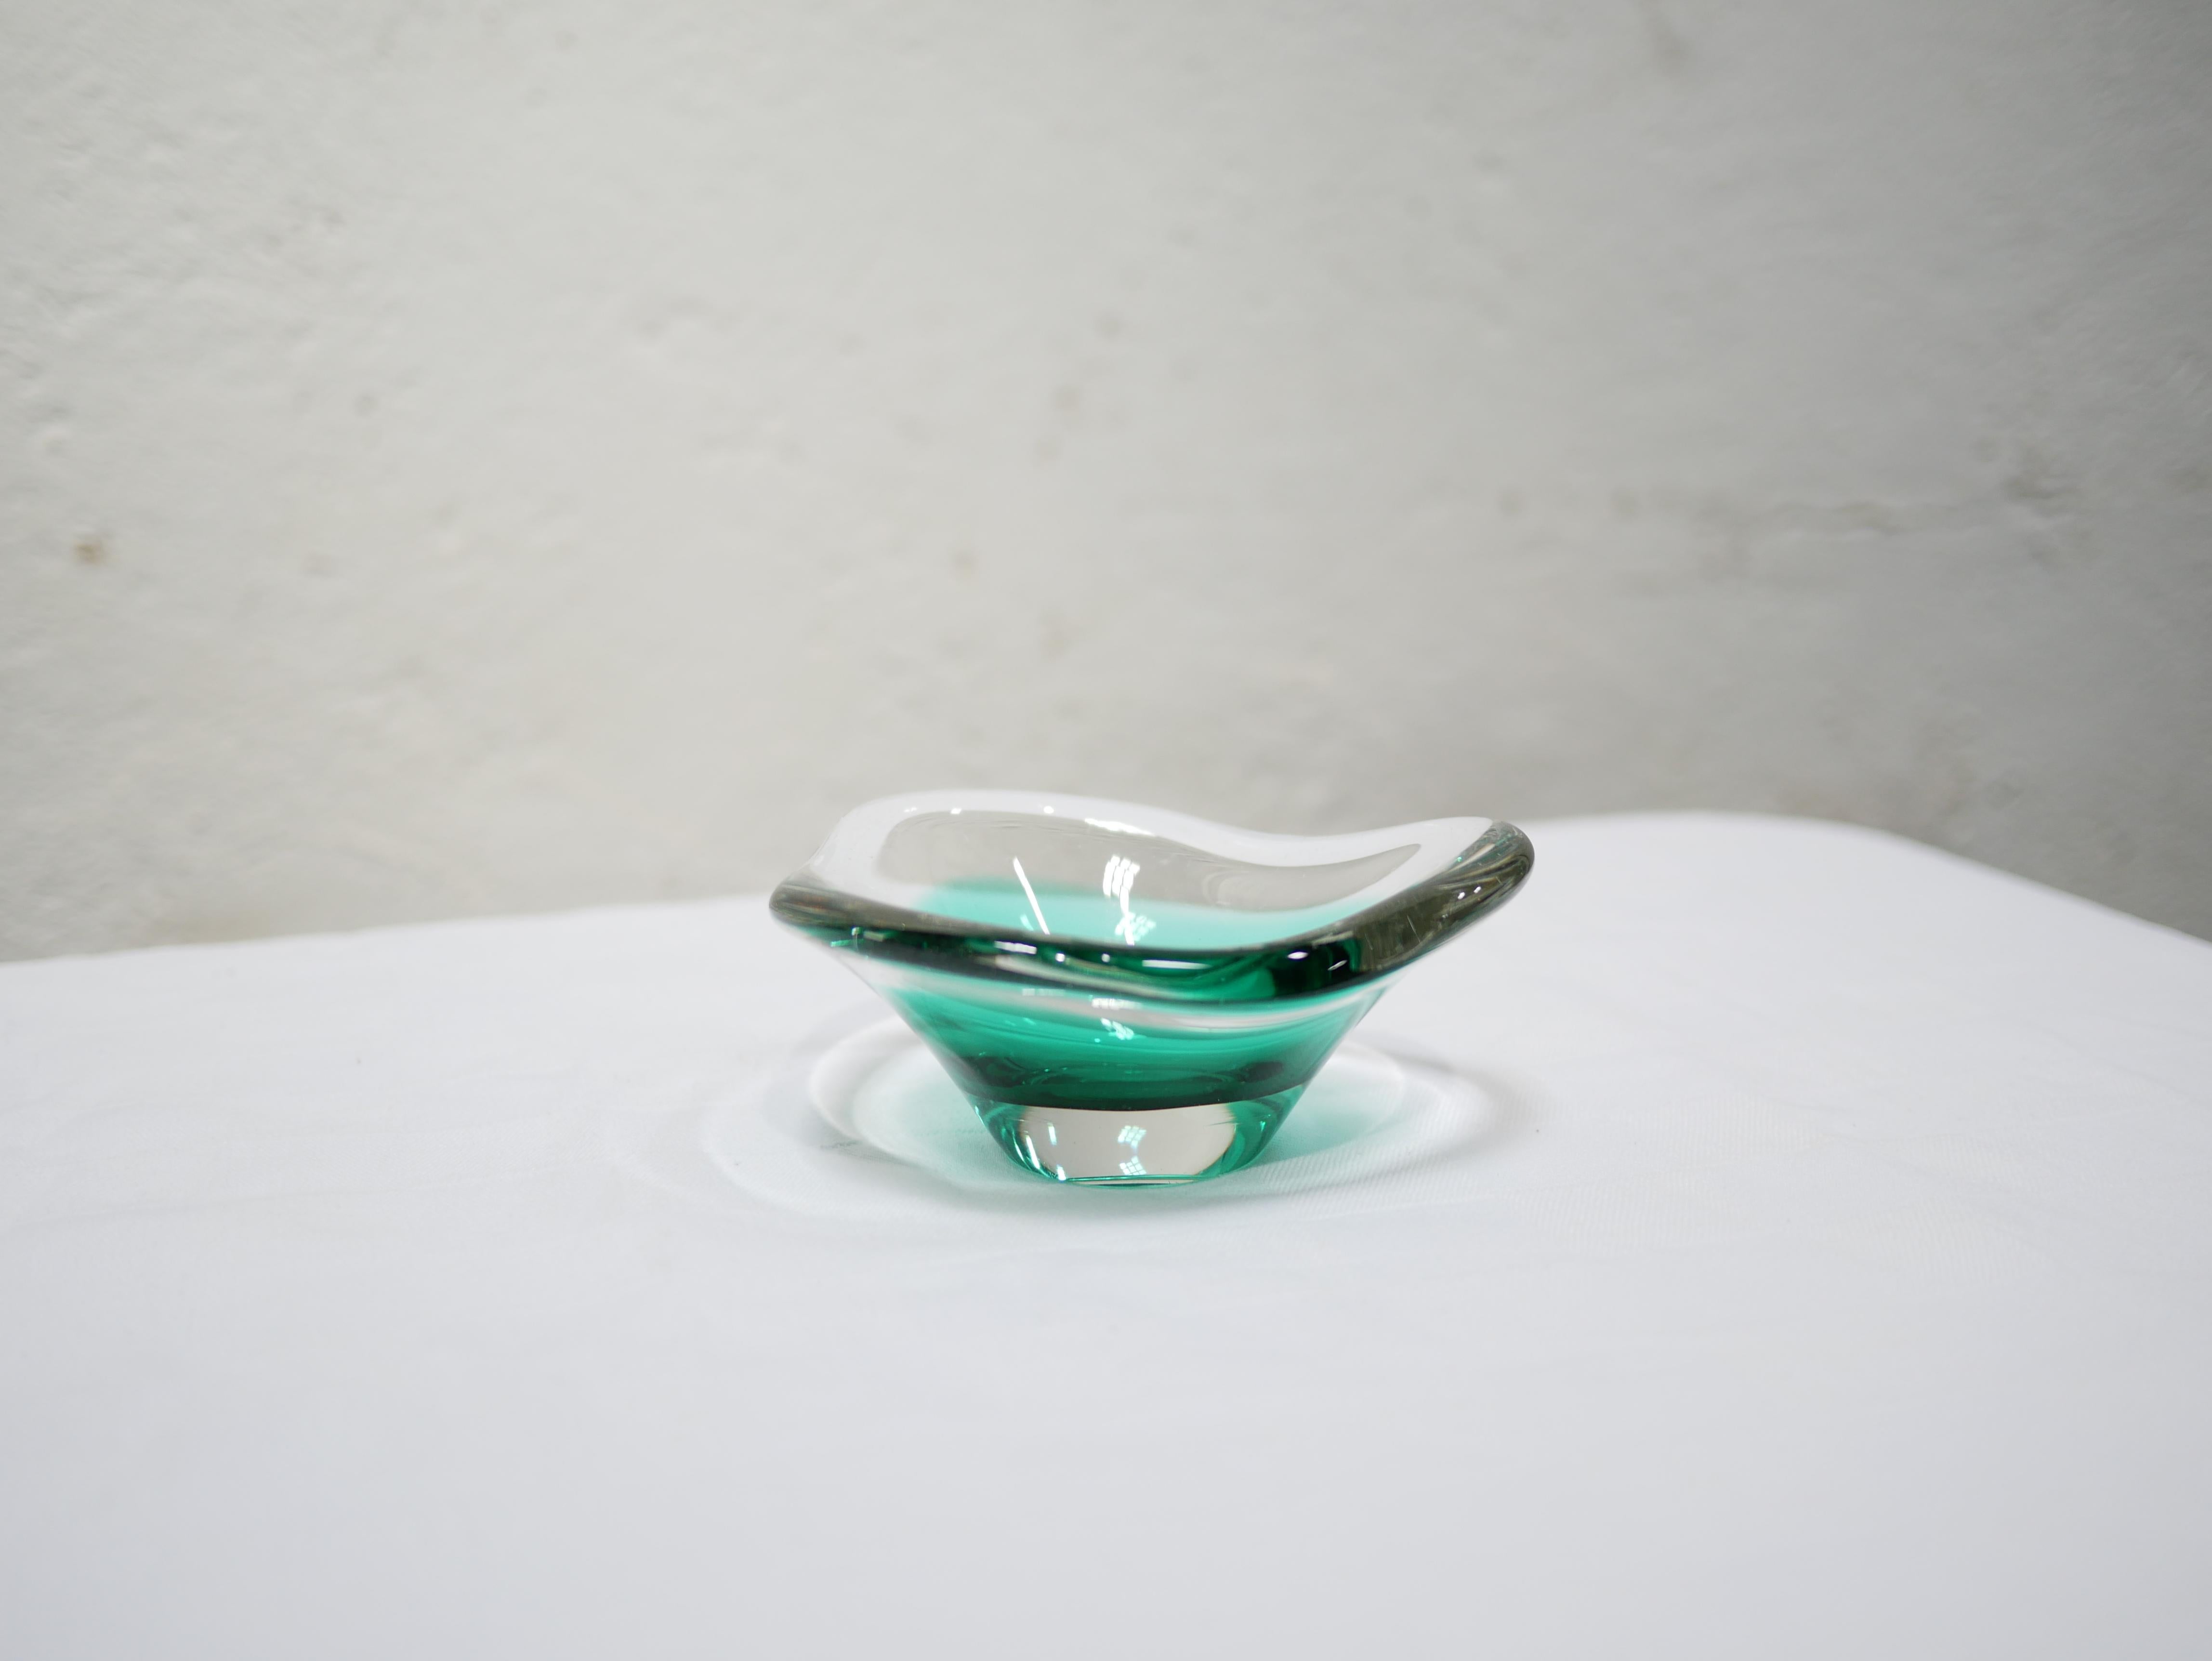 Vide-poche in Murano glass from the 1960s.

Ideal for decoration, its thick glass and luminous green tint will bring softness and warmth. Of good size, aesthetics and of good quality, the empty pocket will be perfect in a current